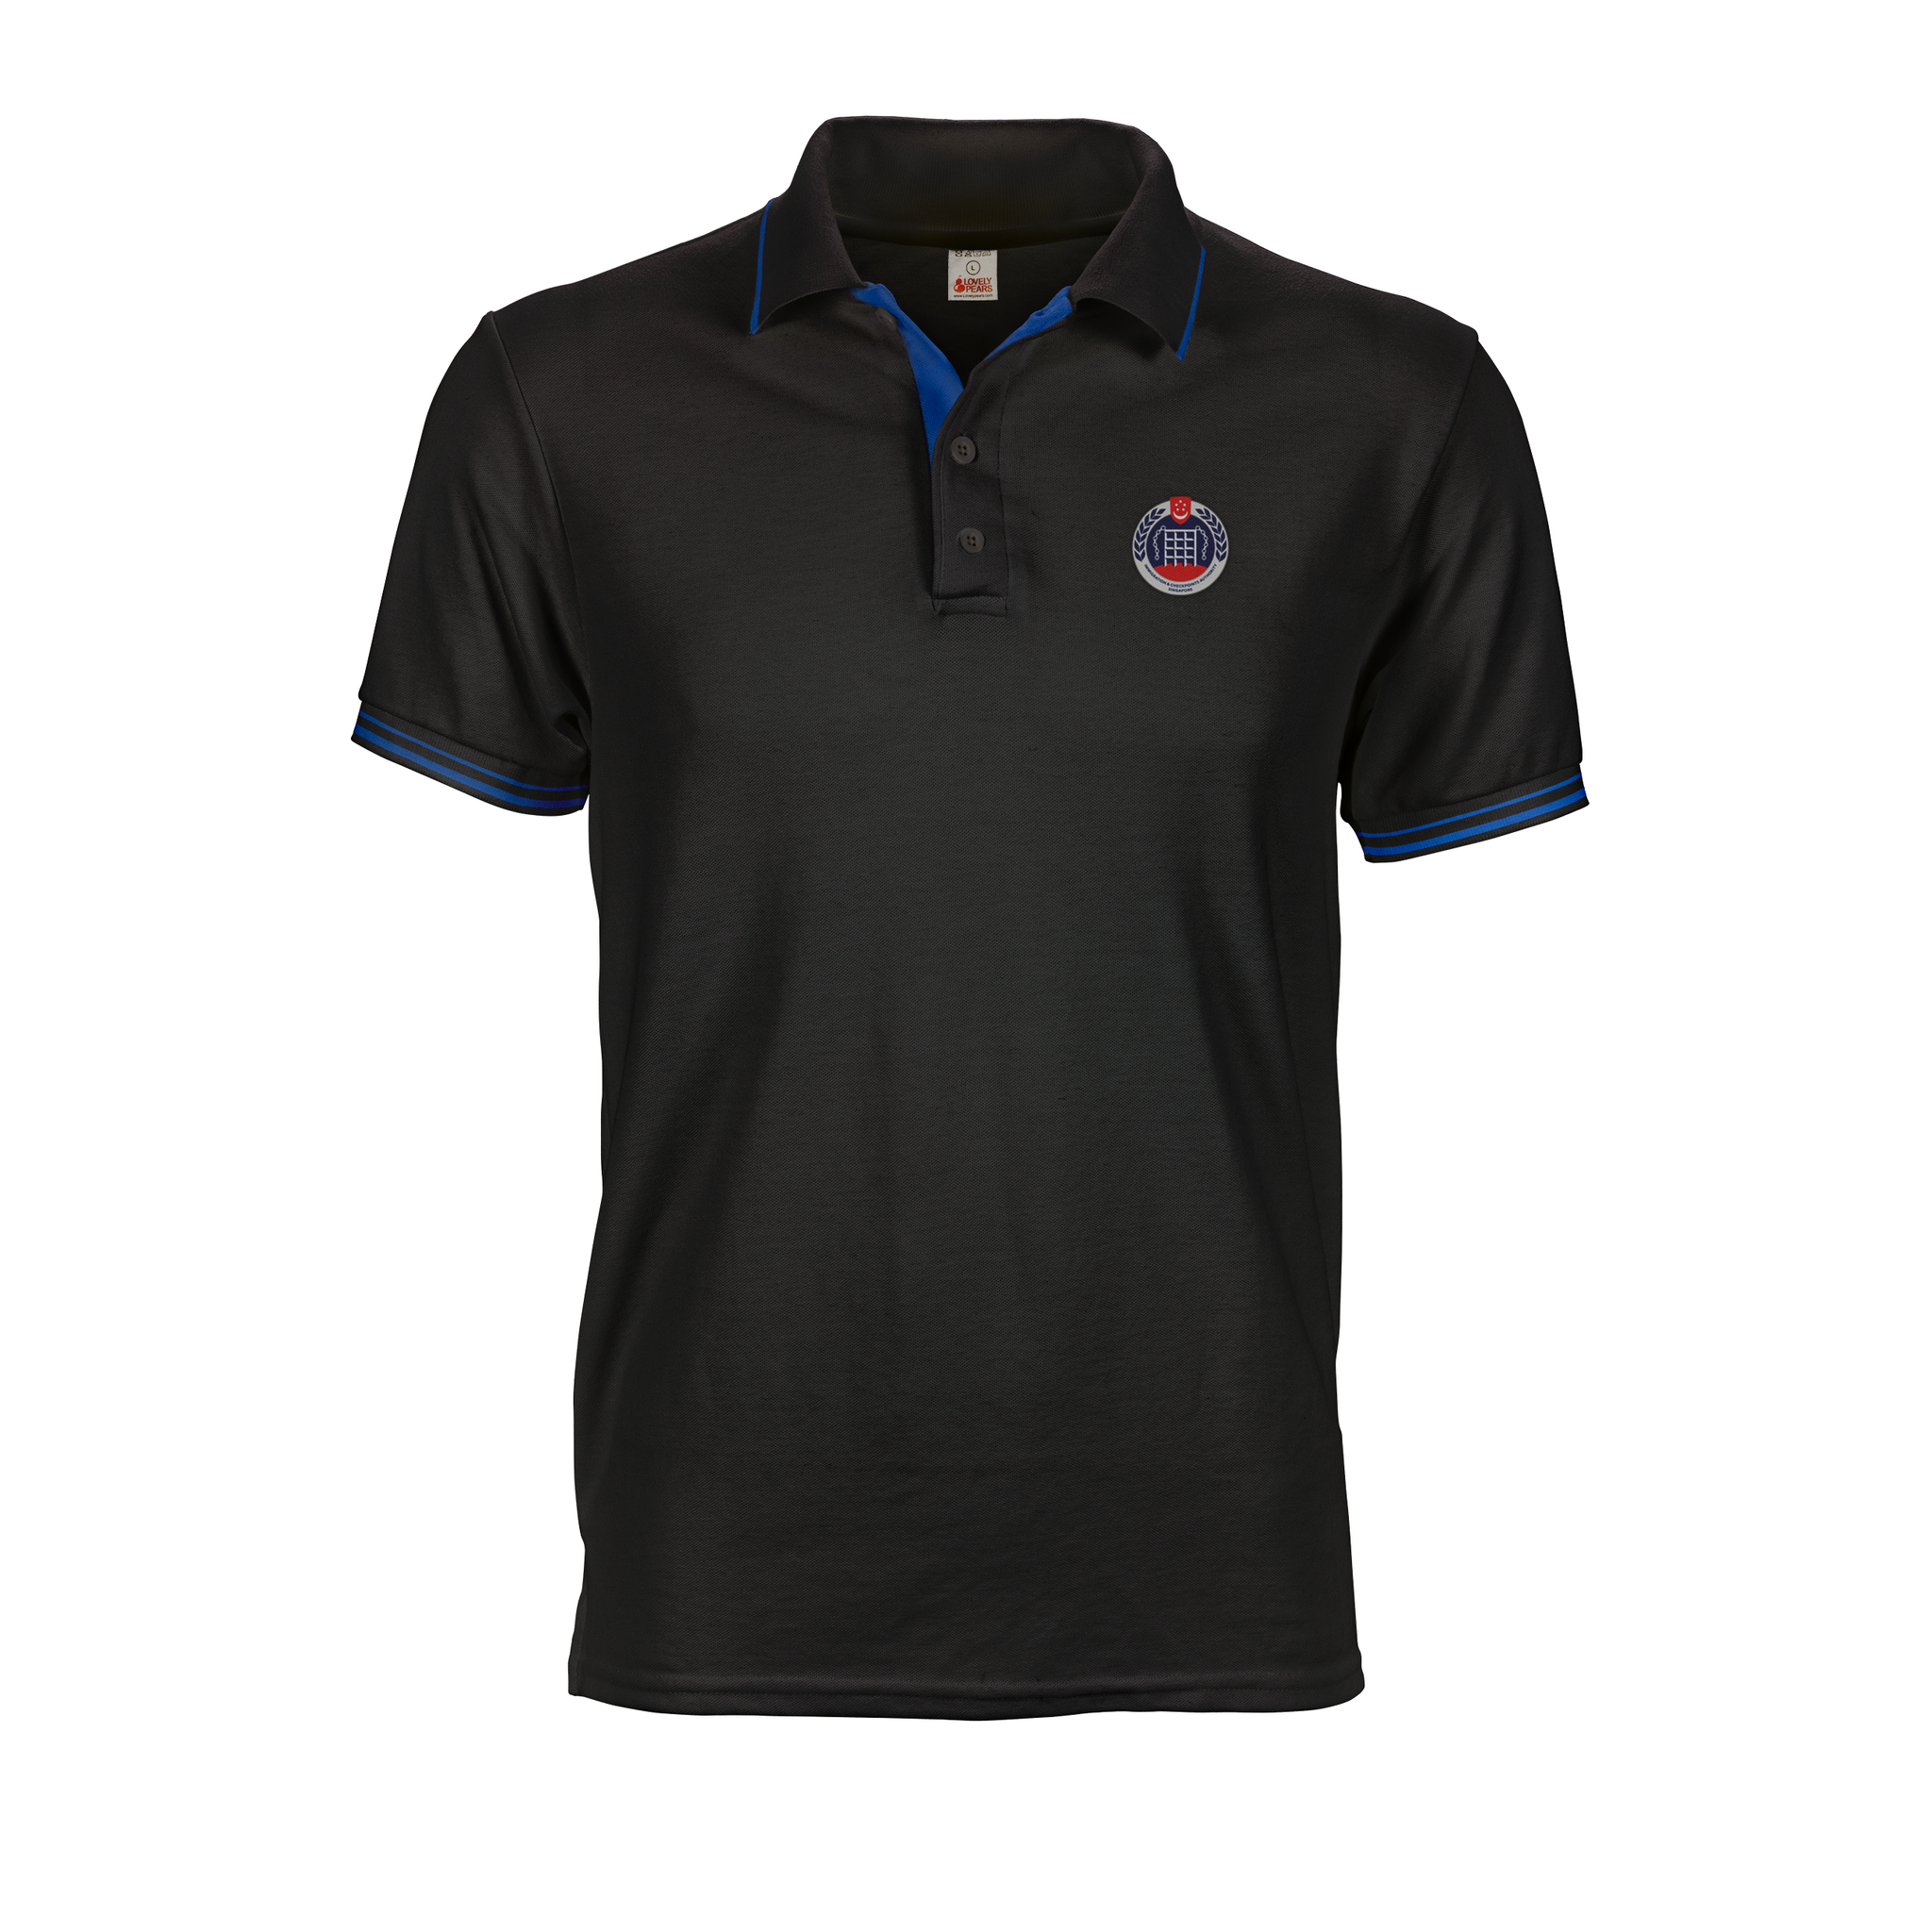 Black ICA polo tee with blue inner placket, collar and cuff tipping stripes